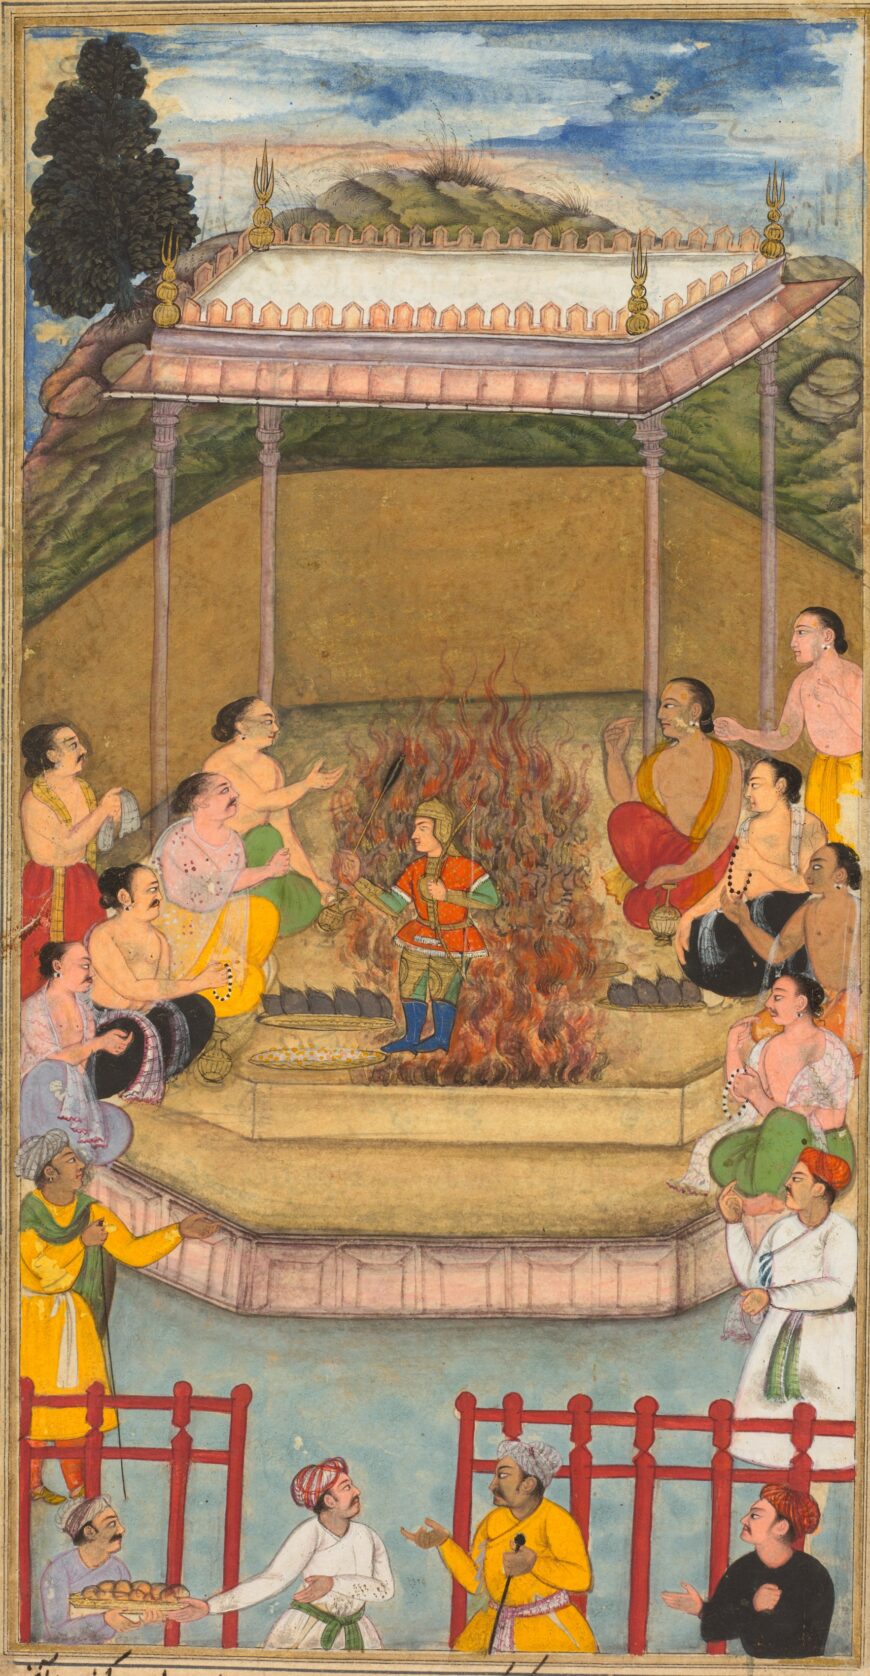 Attributed to Bilal Habshi, Yaja and Upayaja Perform a Sacrifice for the Emergence of Dhrishtadyumna from the Fire, from Adi-parva (volume one) of the Razmnama, 1598, opaque watercolor with gold on paper, 29.8 x 16.8 cm (The Cleveland Museum of Art)